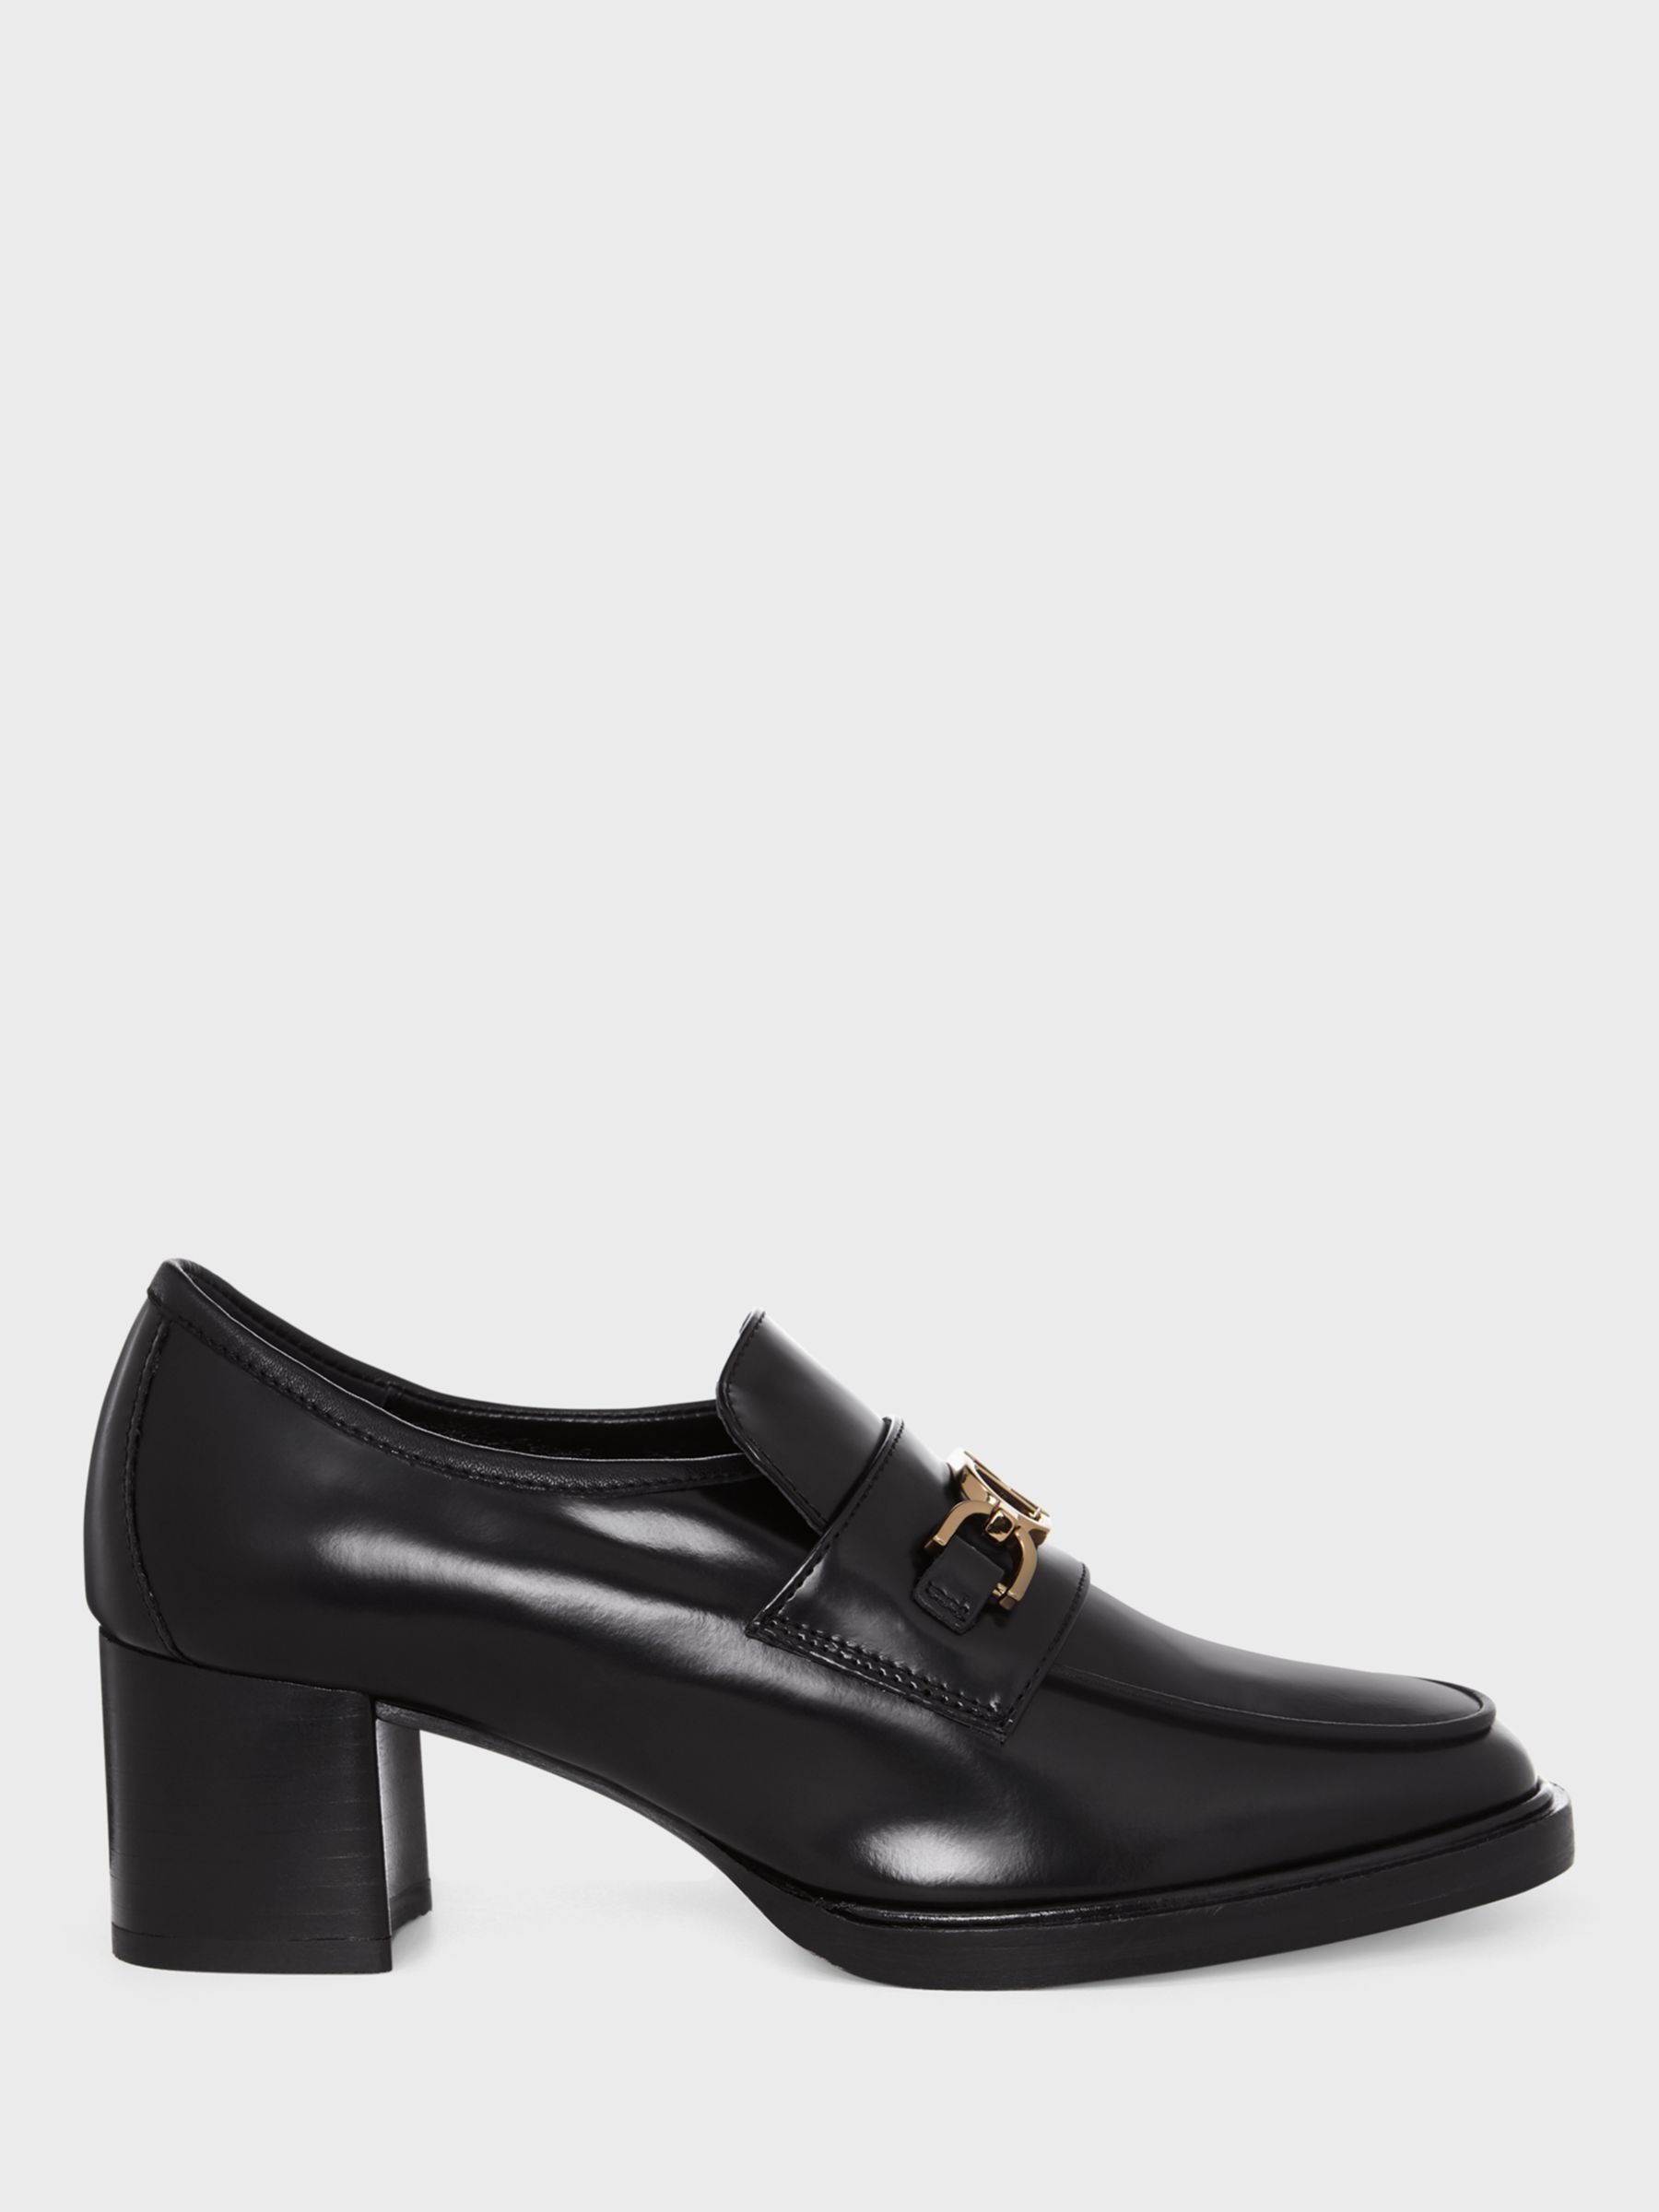 Hobbs Laura Leather Heeled Loafers, Black, 9